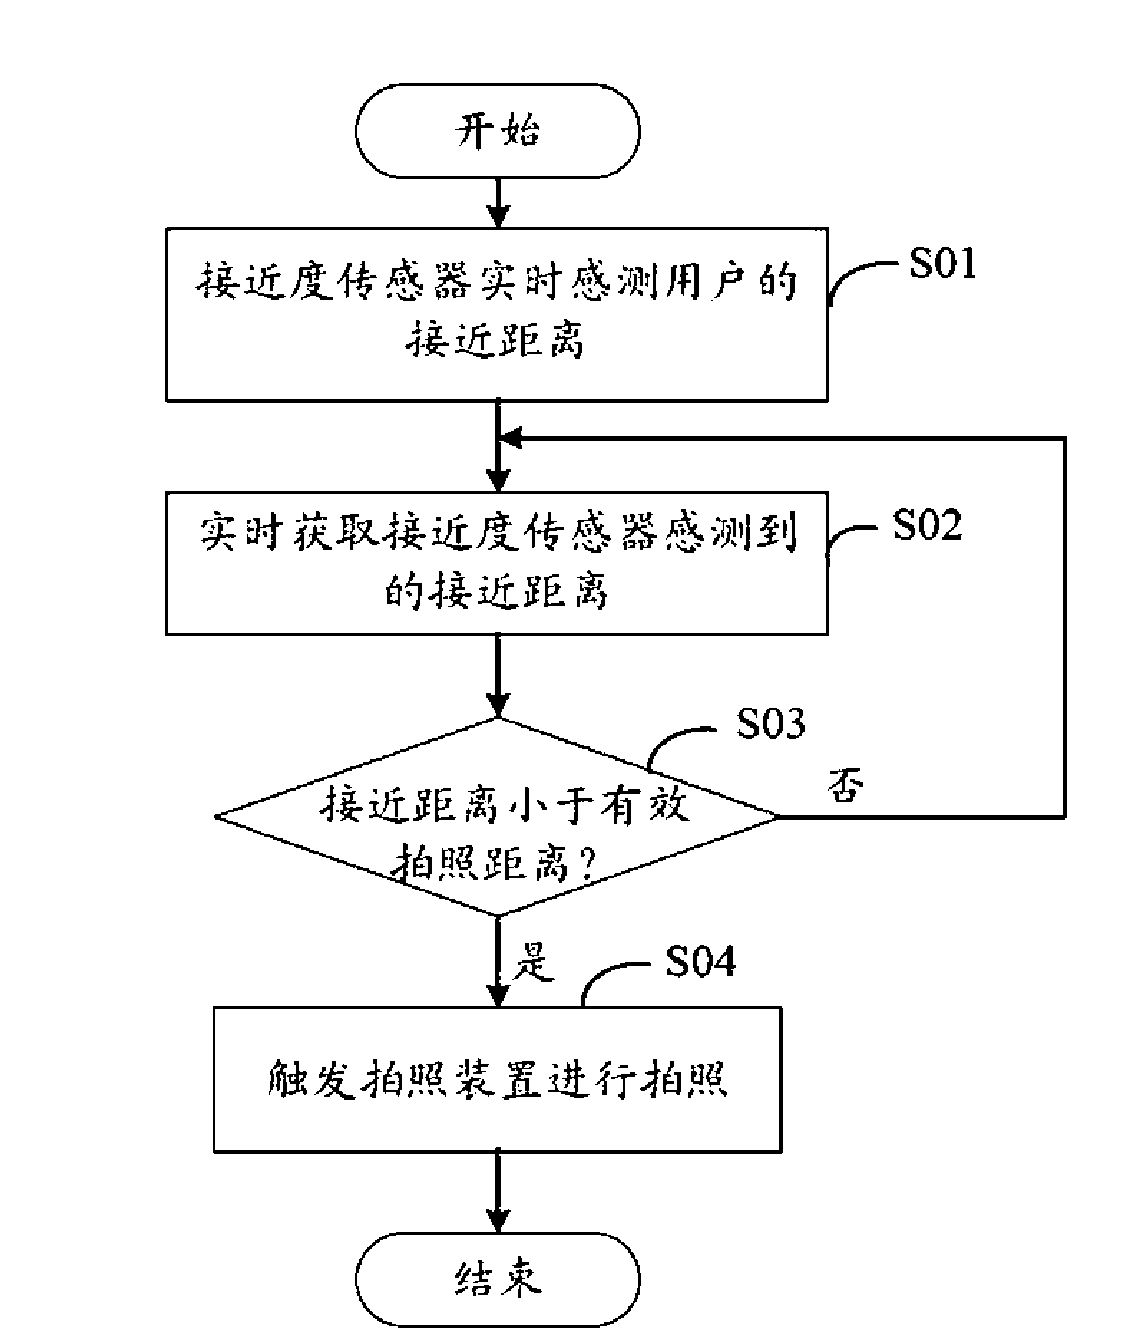 Photographic system and method